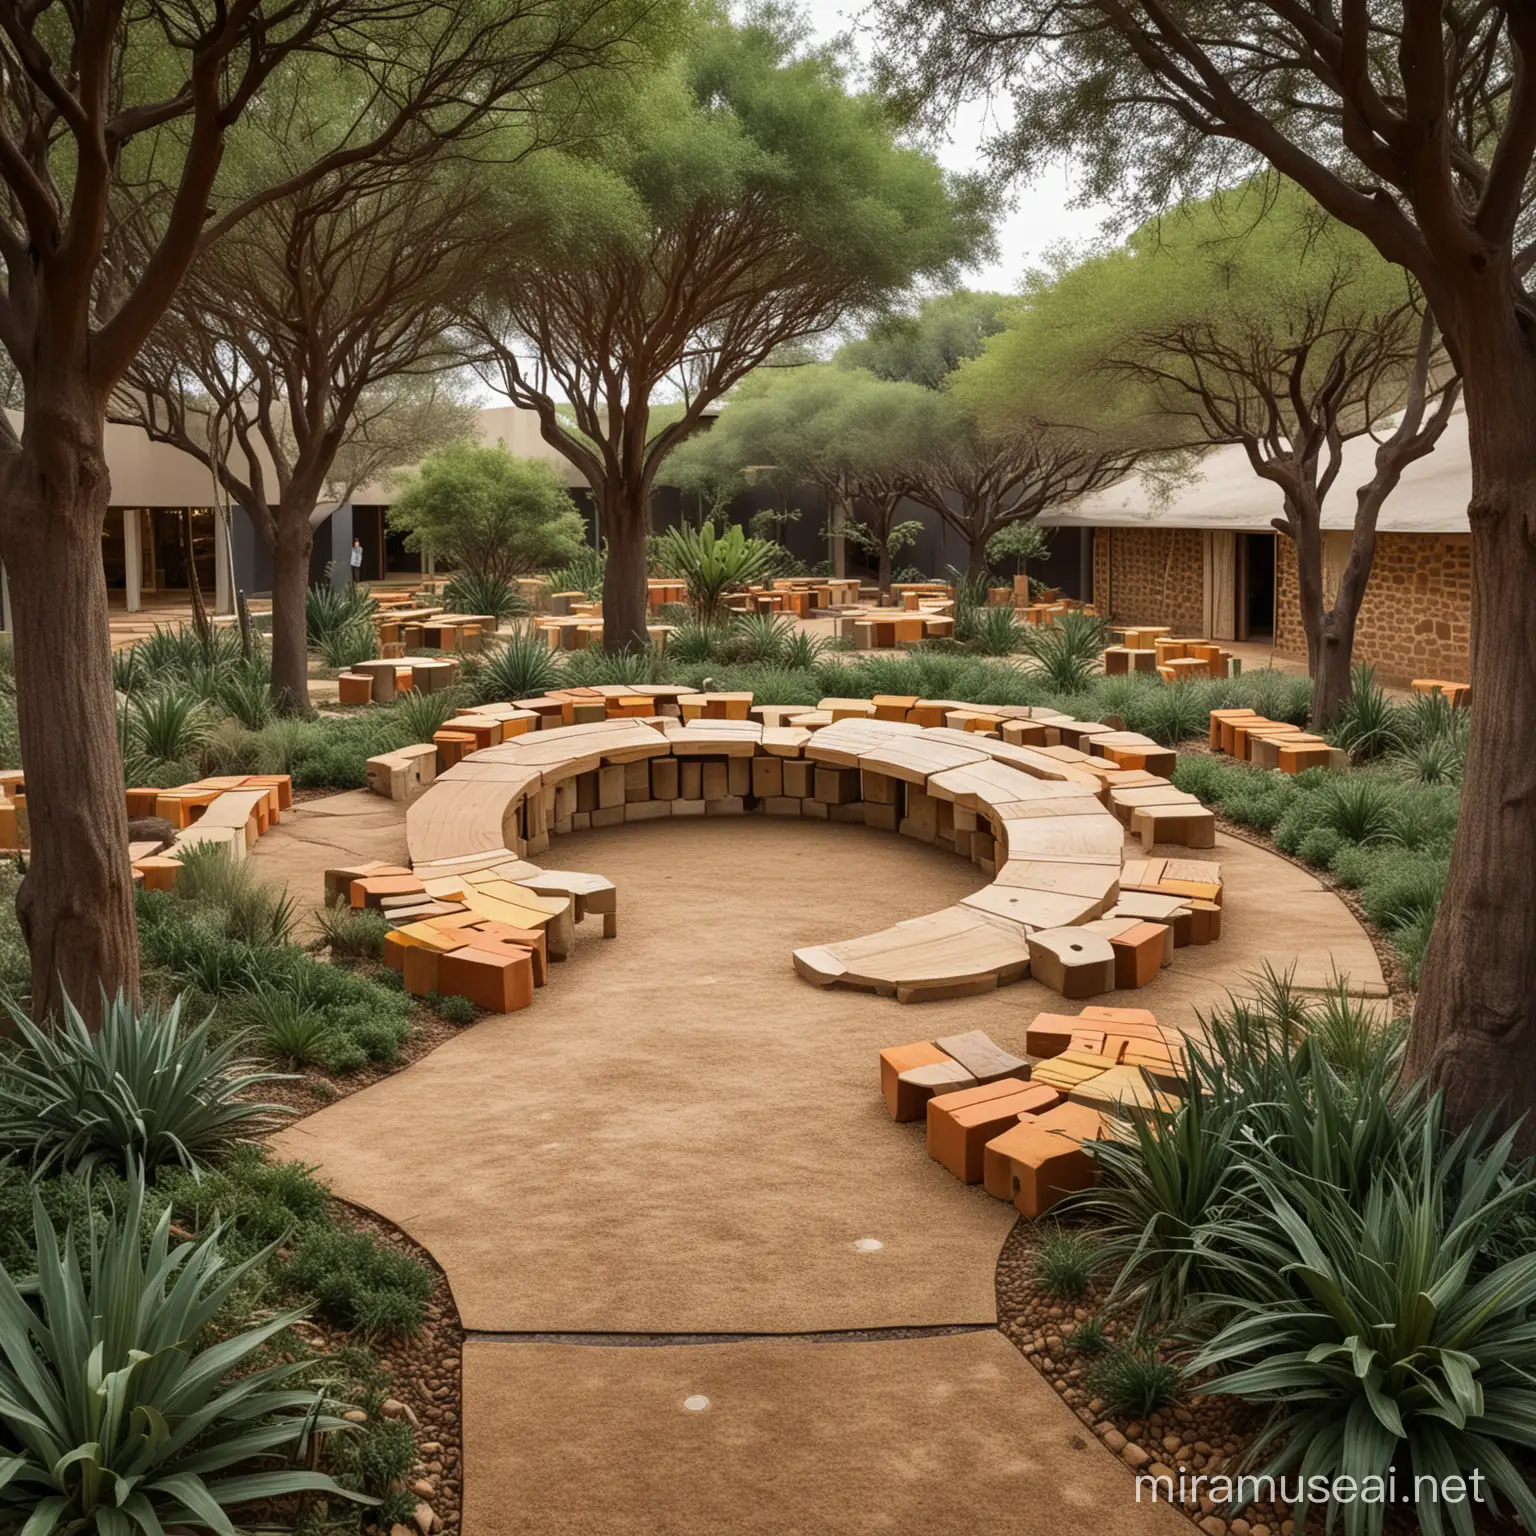 storytelling in exterior landscape architecture using symbols and colors of southern africa culture represent the culture and the stories sequence moving from space to space separated from eachother having sunken seatings